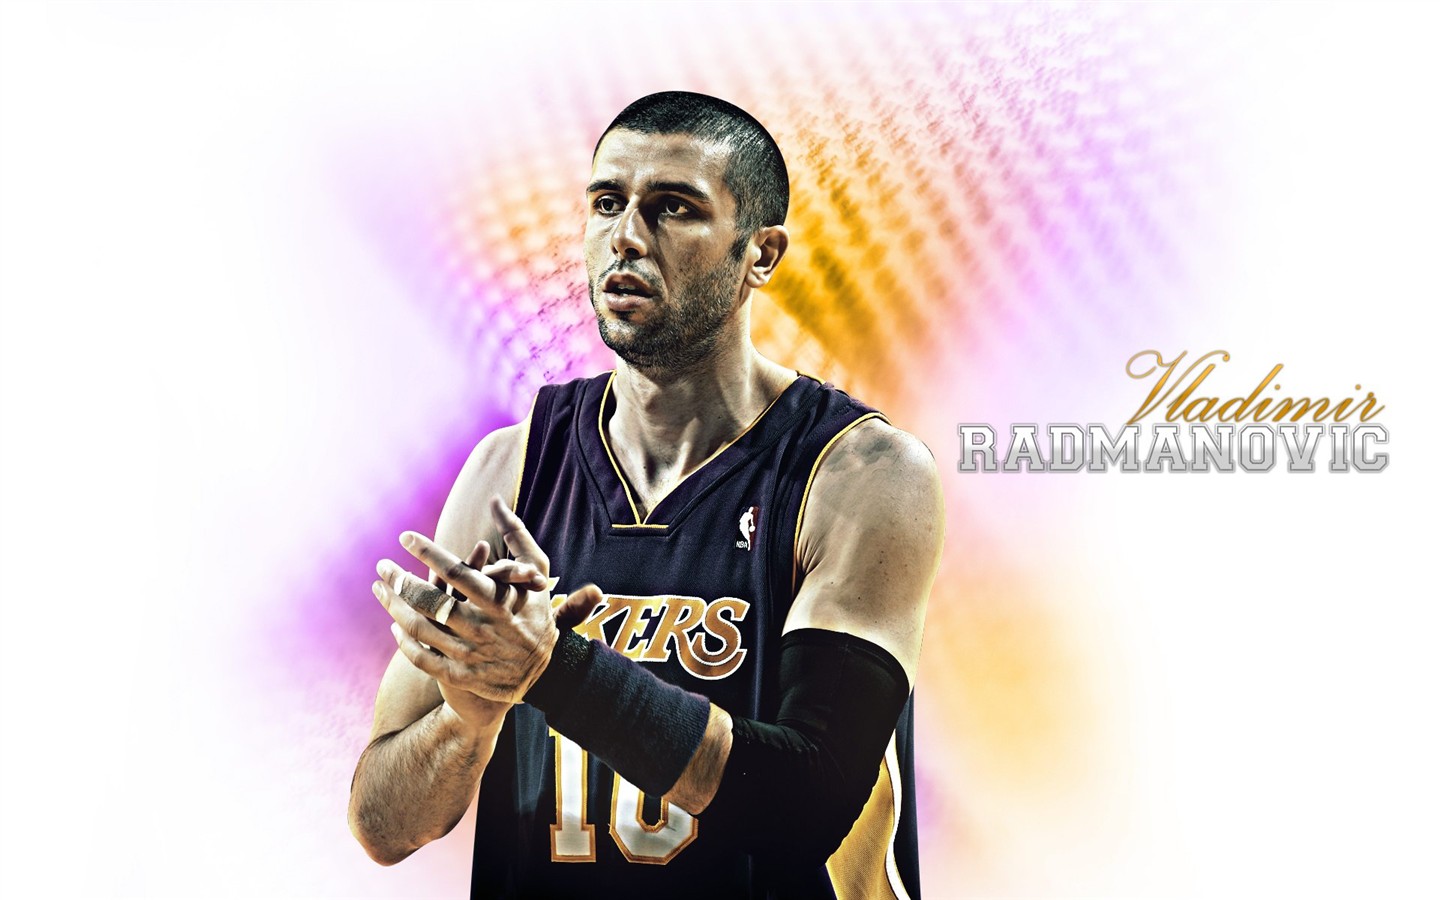 Los Angeles Lakers Wallpaper Oficial #29 - 1440x900